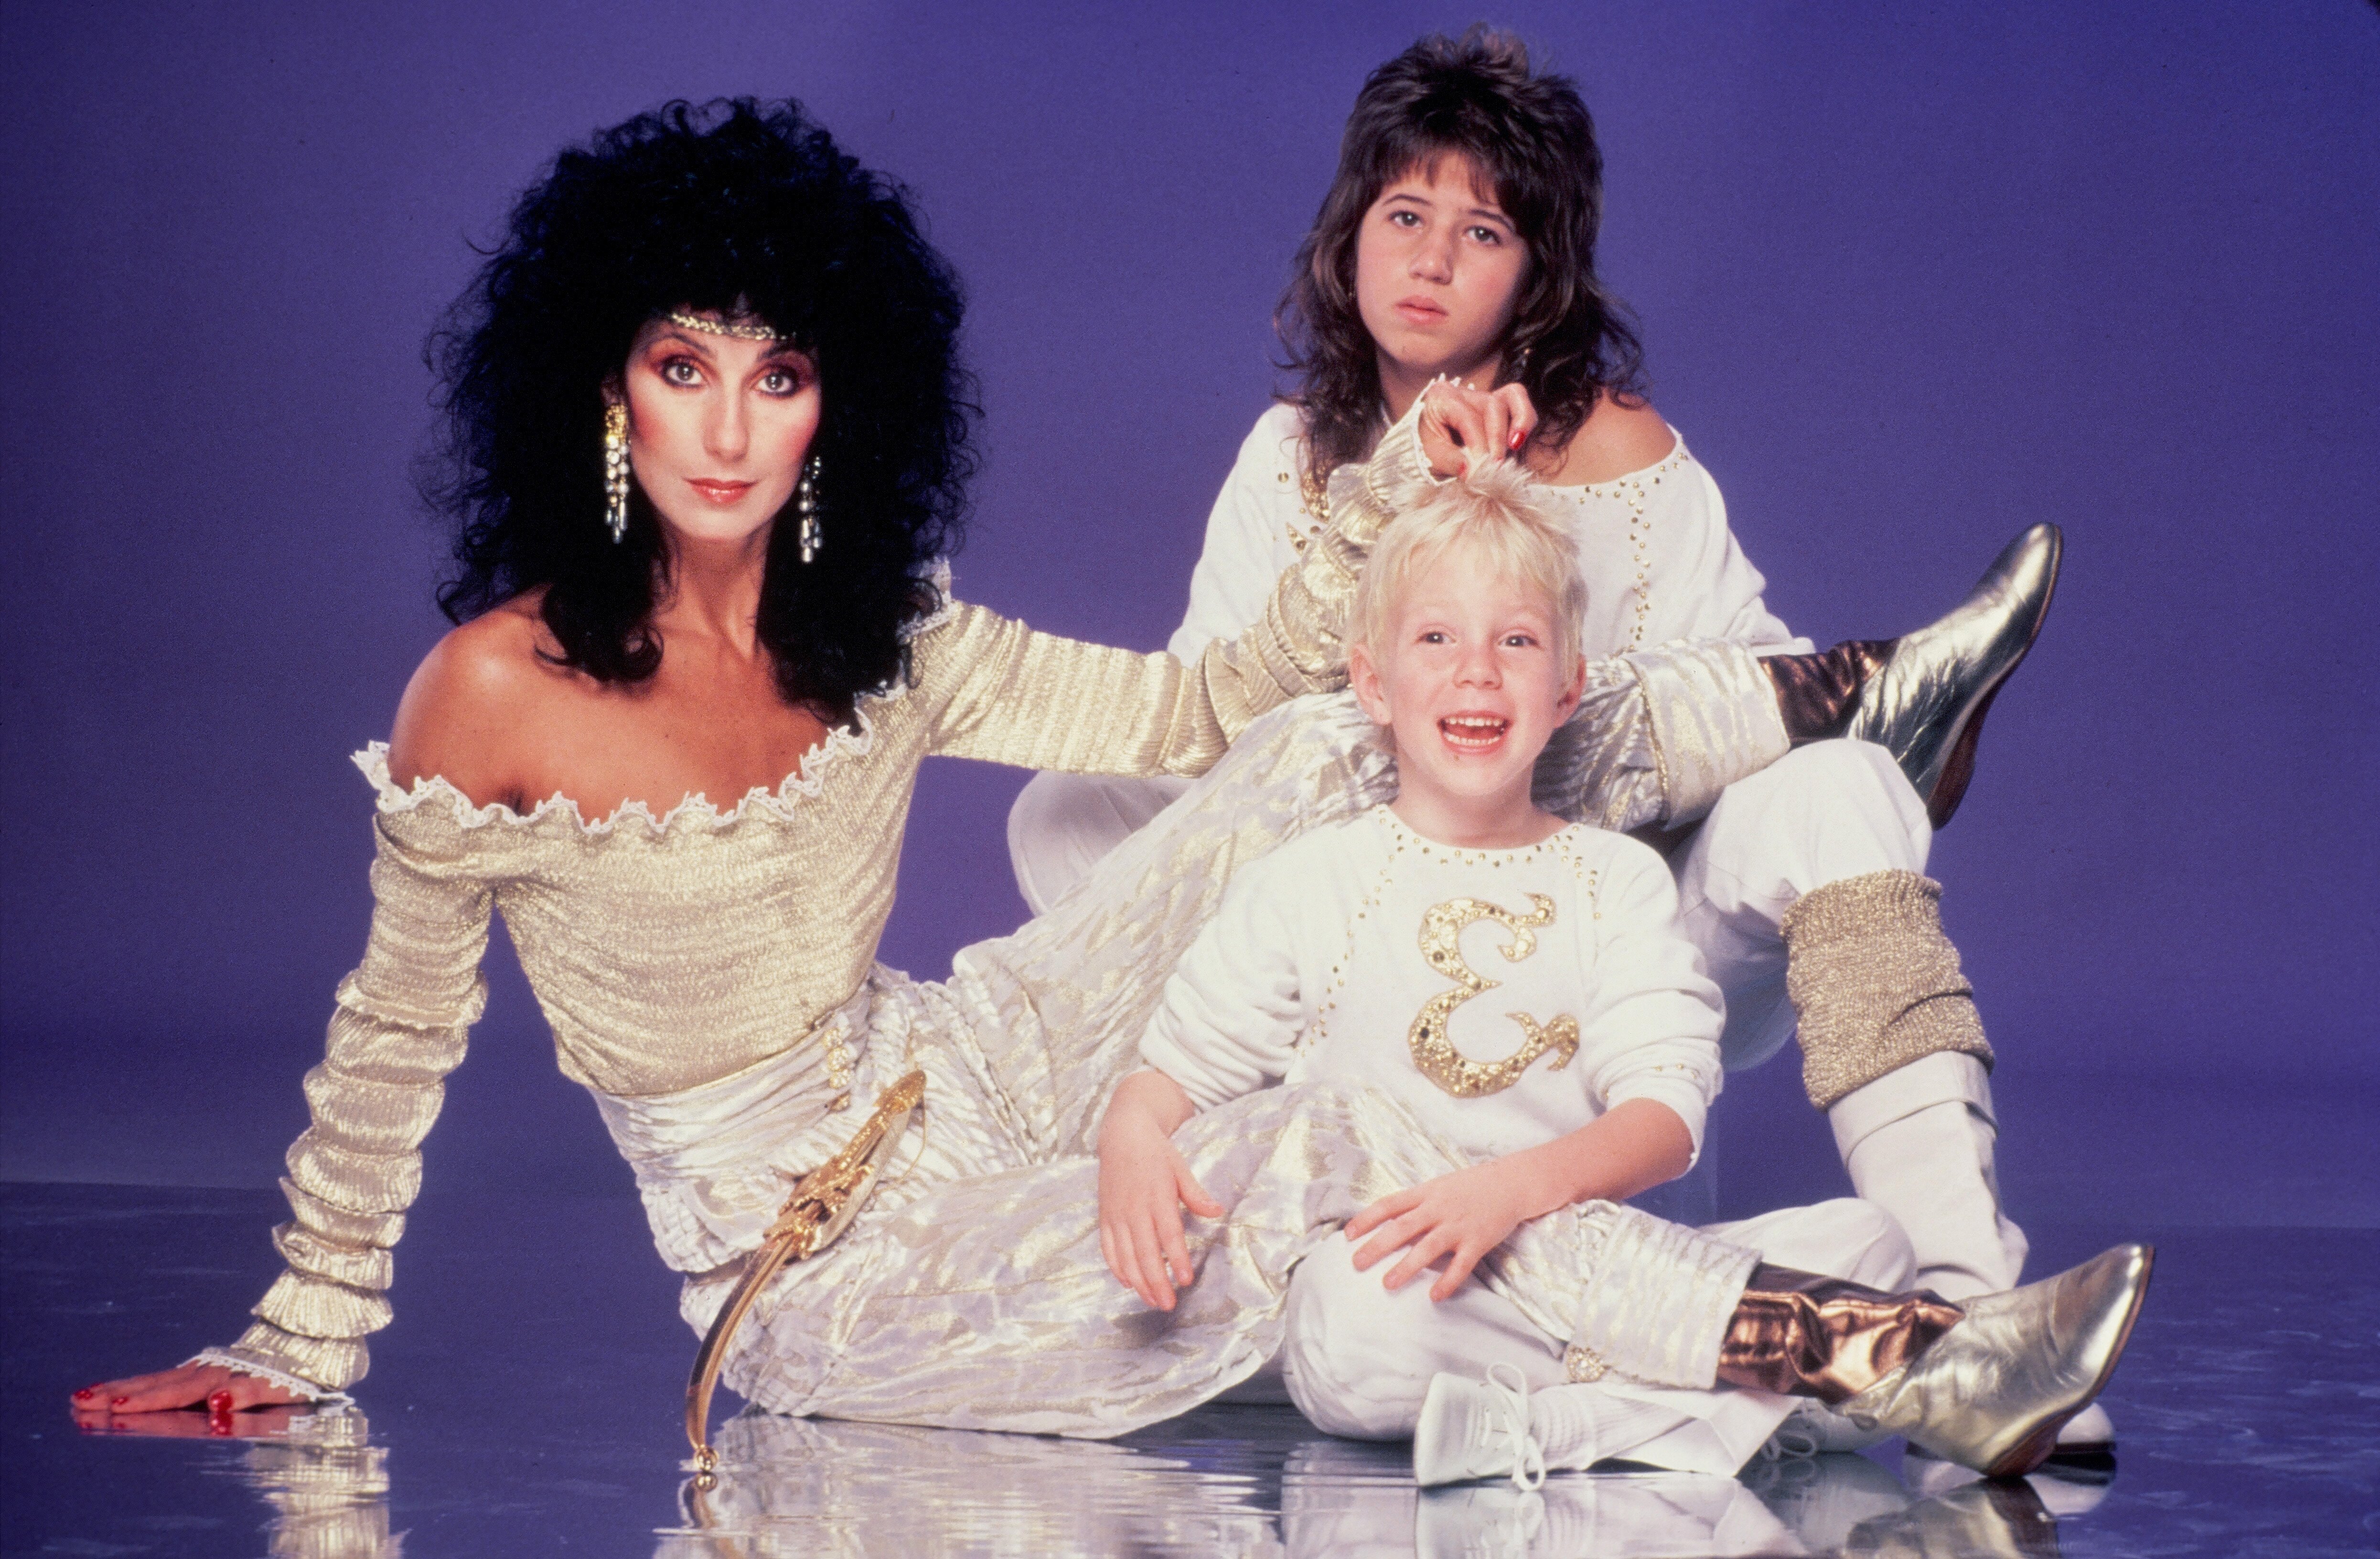 Cher, Chastity Bono, and Elijah Blue Allman posing for a photo session in Los Angeles, California, in June 1981 | Source: Getty Images